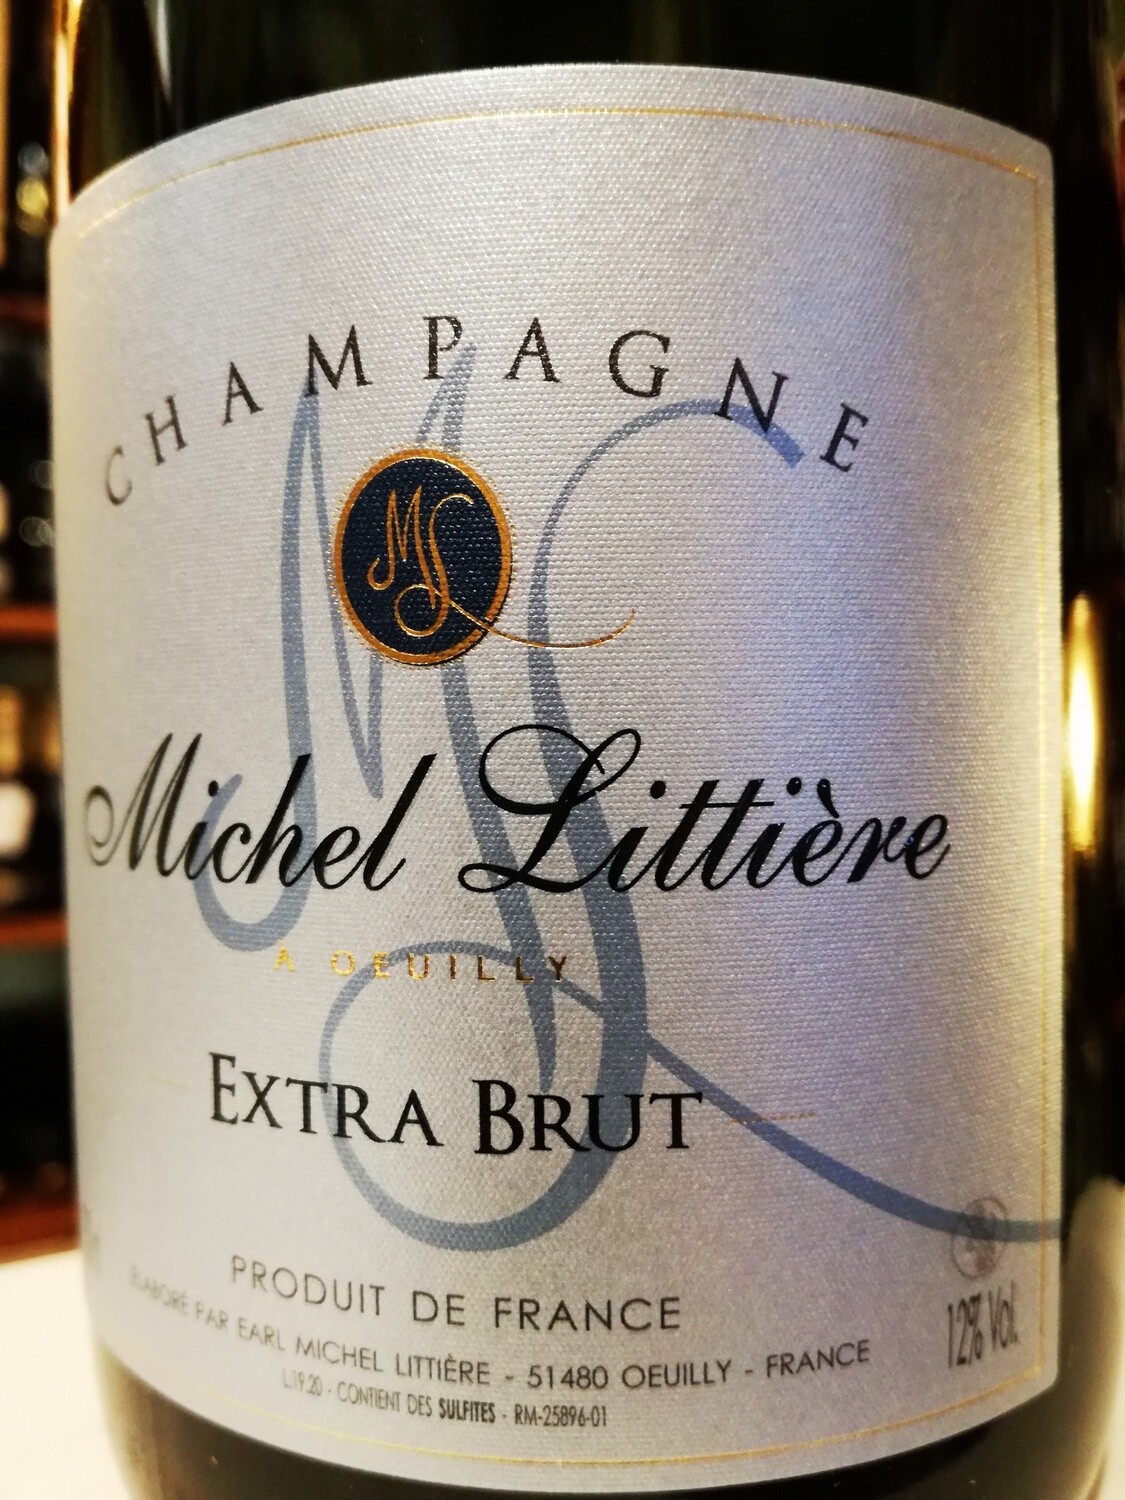 CHAMPAGNE MICHEL LITTIERE EXTRA BRUT R.M. IN OEUILLY - 0,75L - 12% Vol.